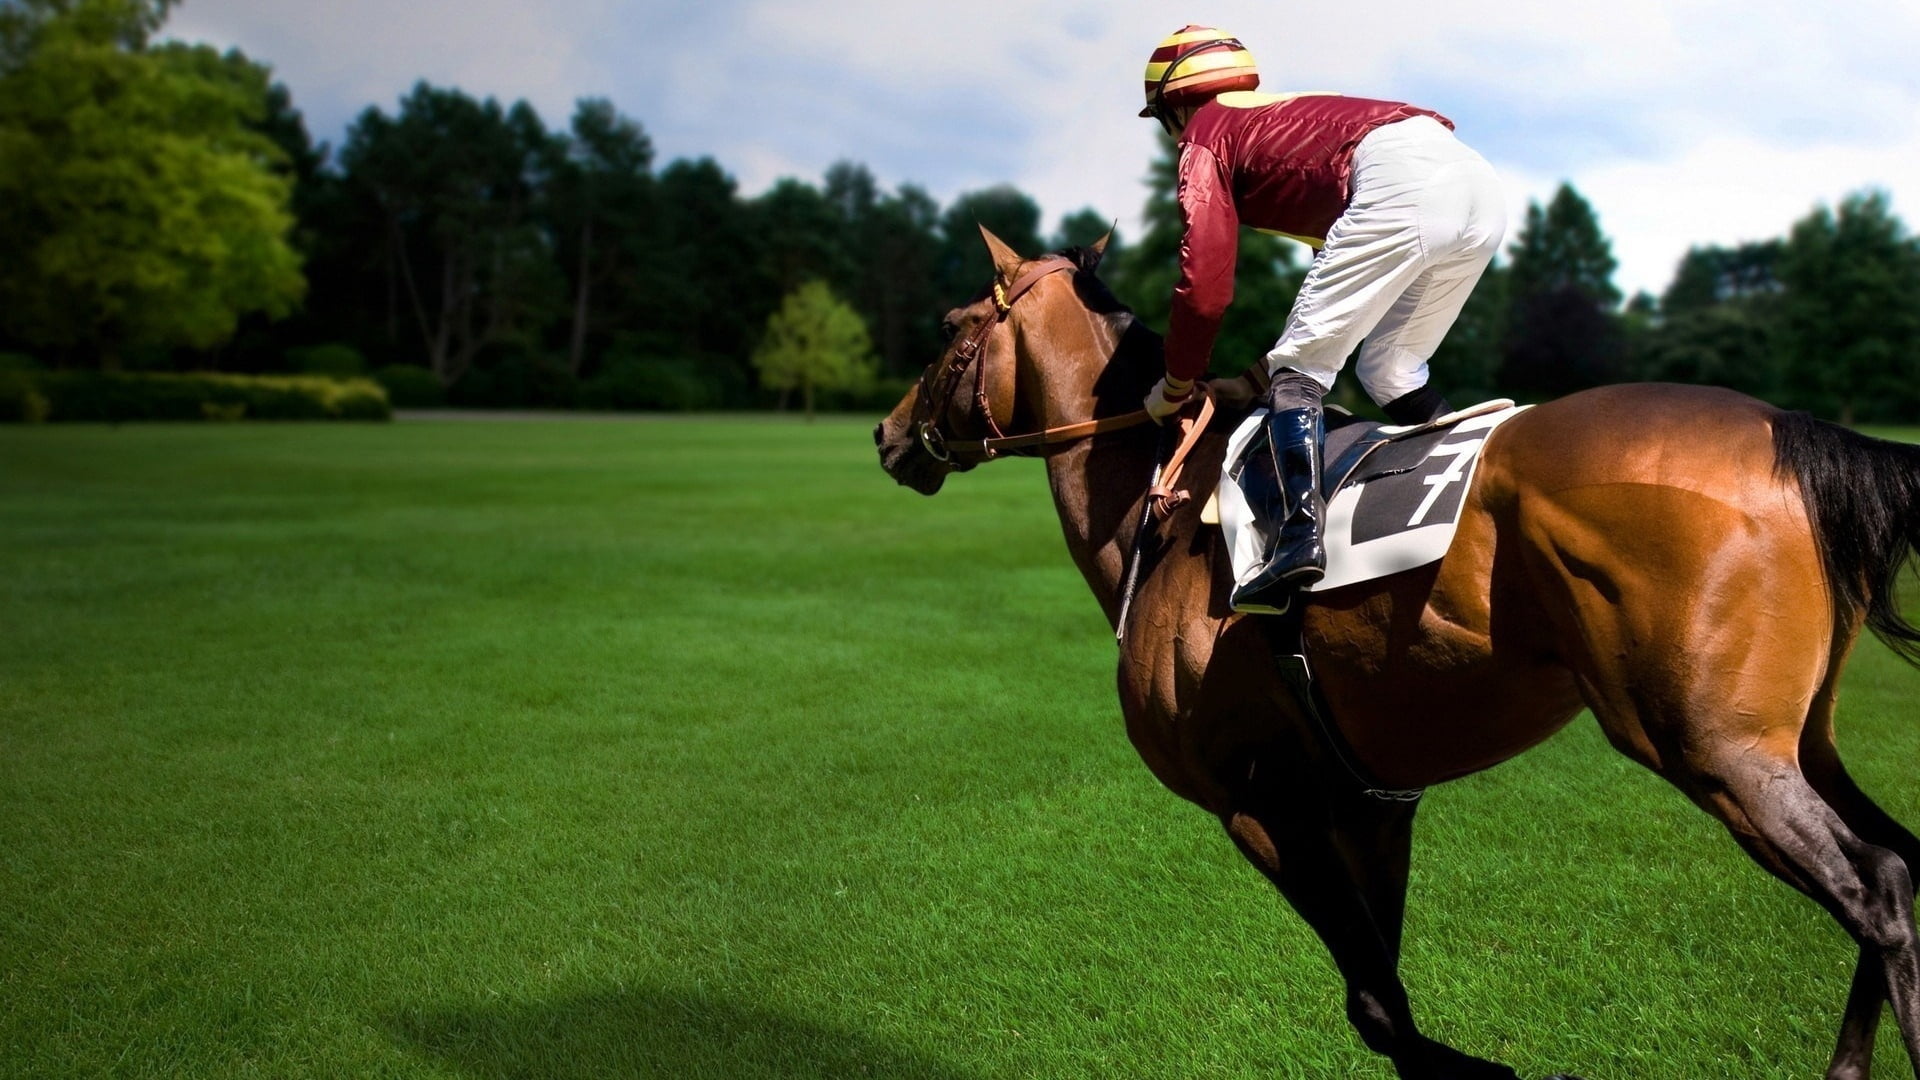 person riding on horse, sports, equestrian, rider, animal, outdoors